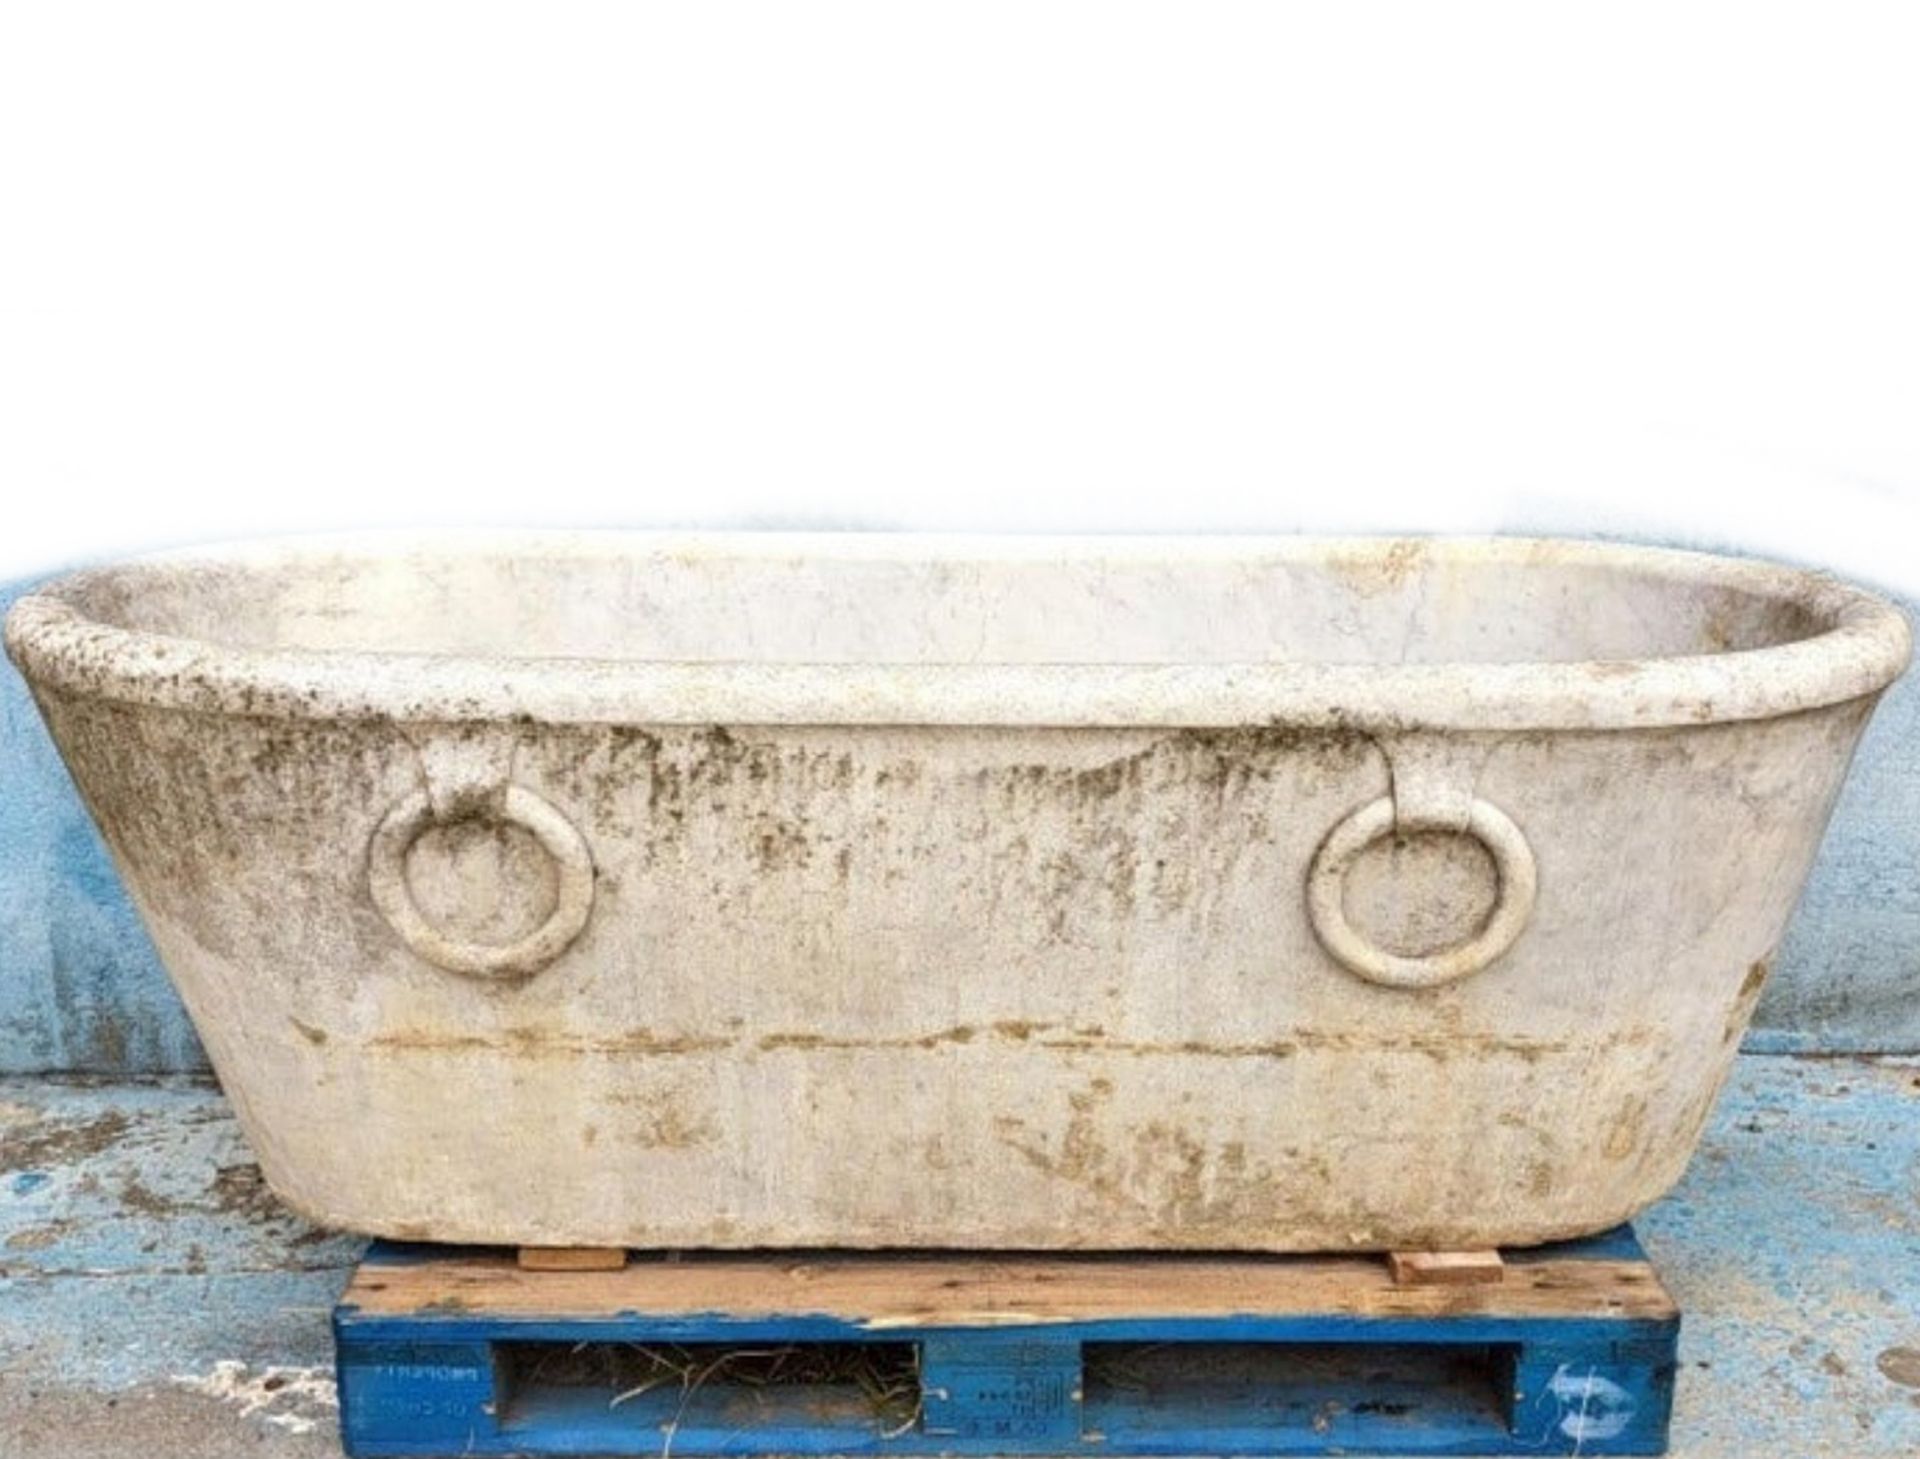 Roman bathtub from the 18th century in Carrara marble, perfect condition - Image 4 of 5